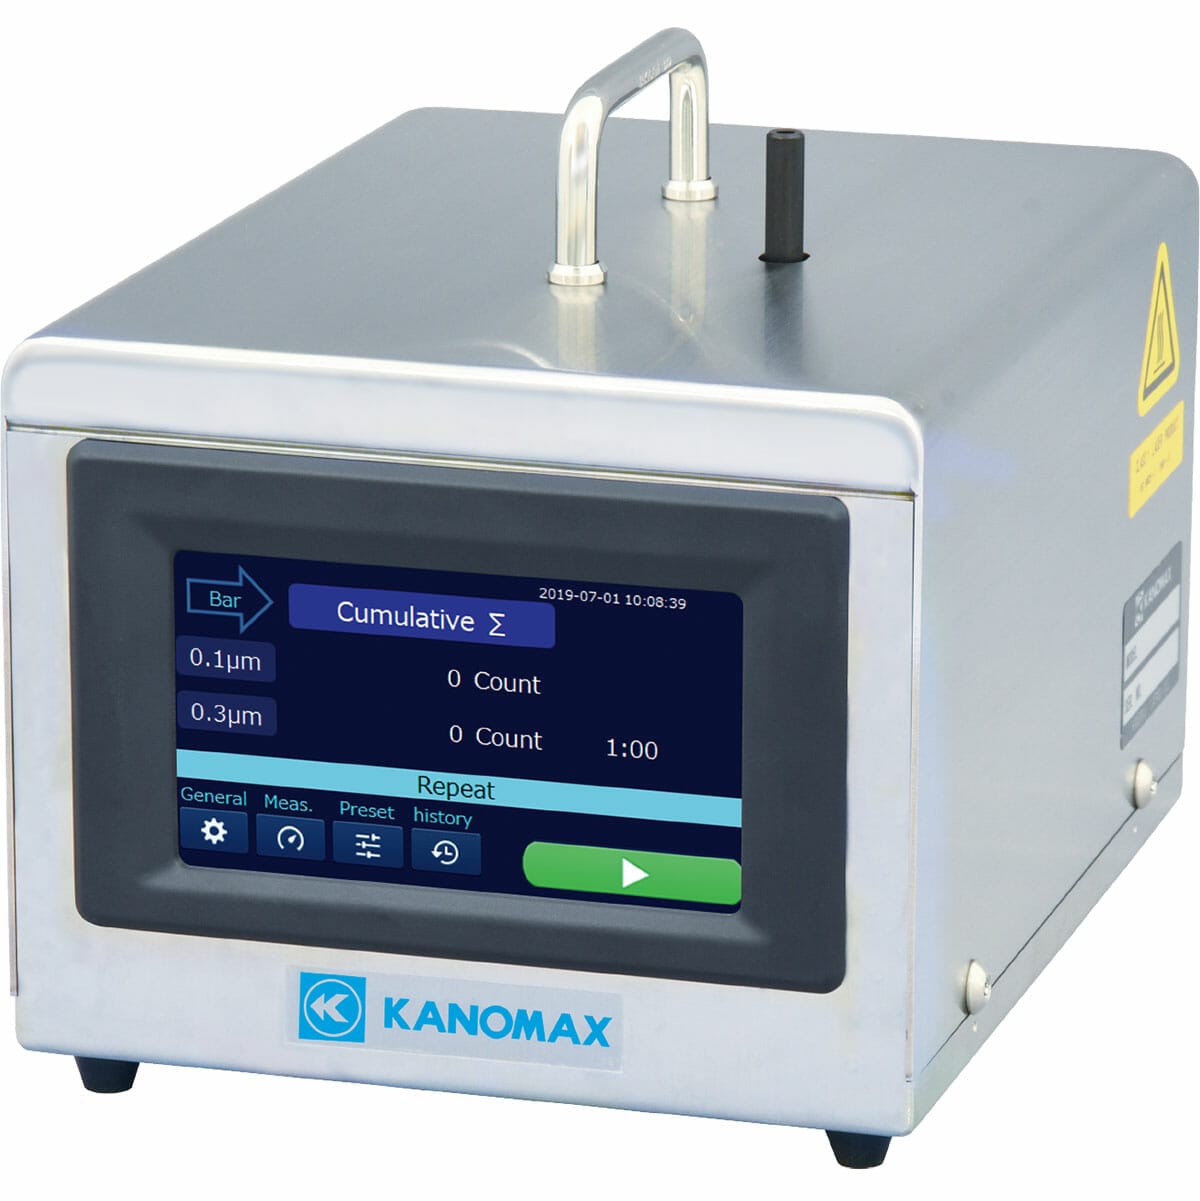 Kanomax 0.1 Micron Portable Particle Counter - Model 3950